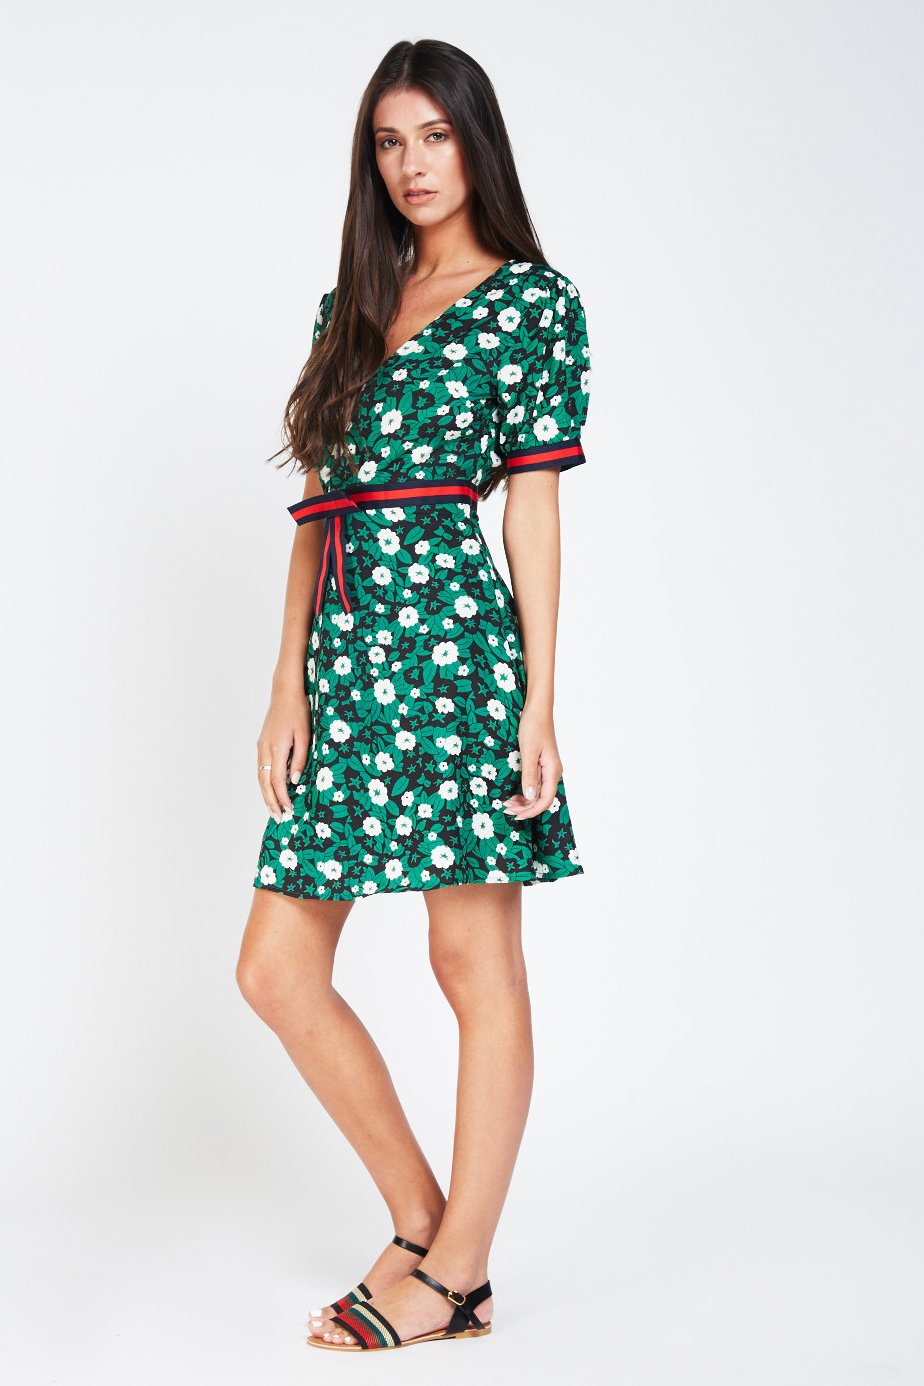 Printed Striped Ribbon Tie Frilly Dress - Just $3